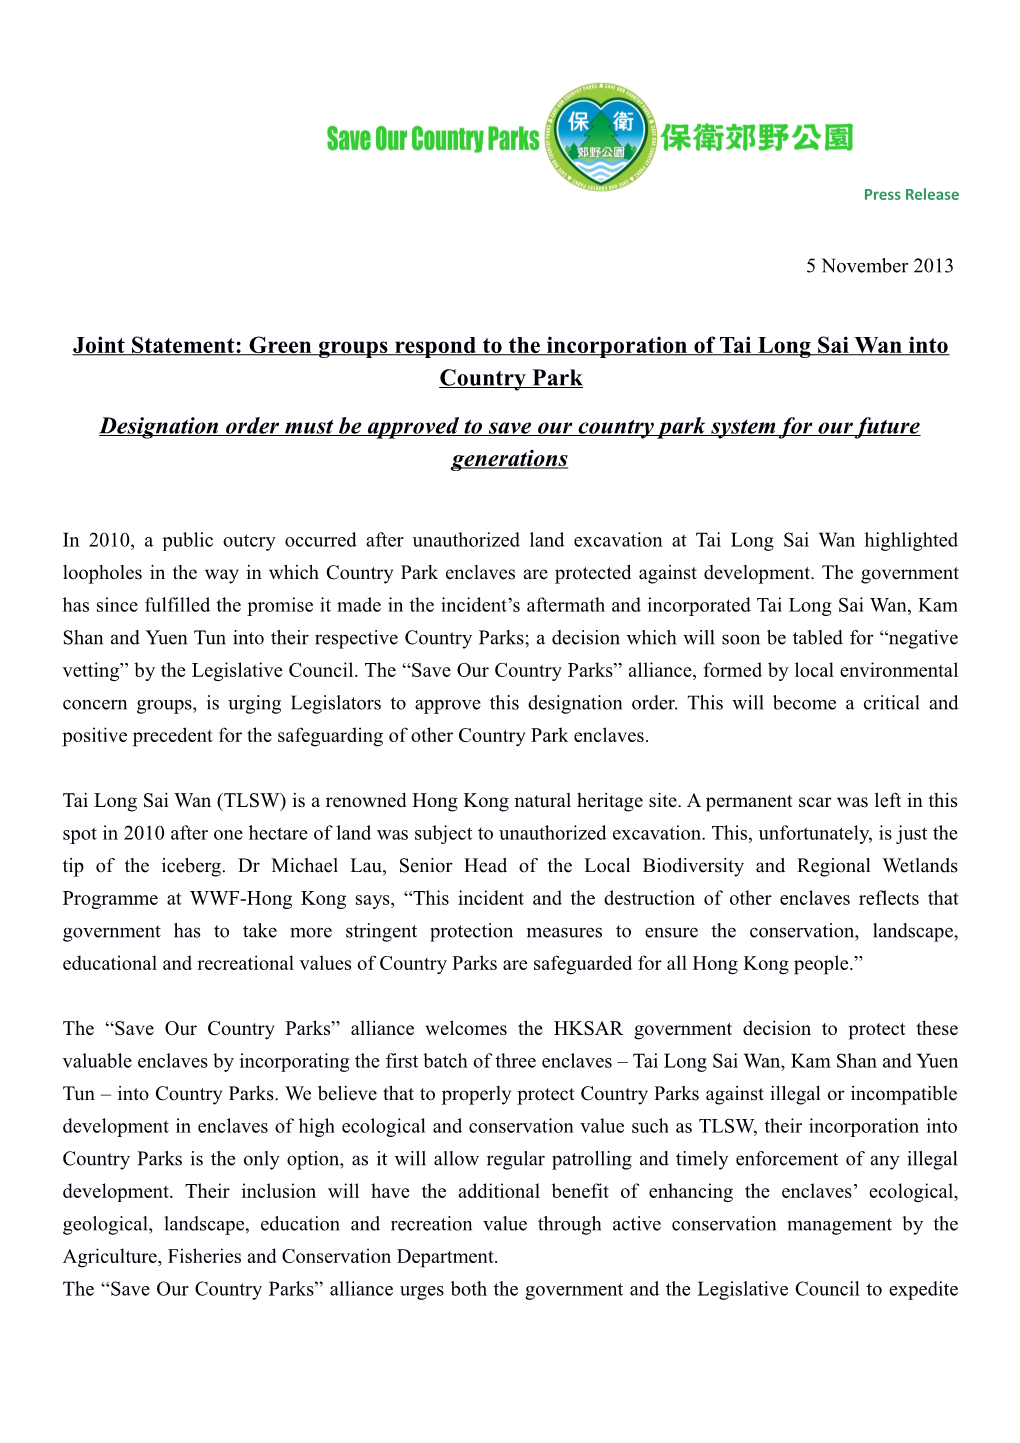 Joint Statement: Green Groups Respond to the Incorporation of Tai Long Sai Wan Into Country